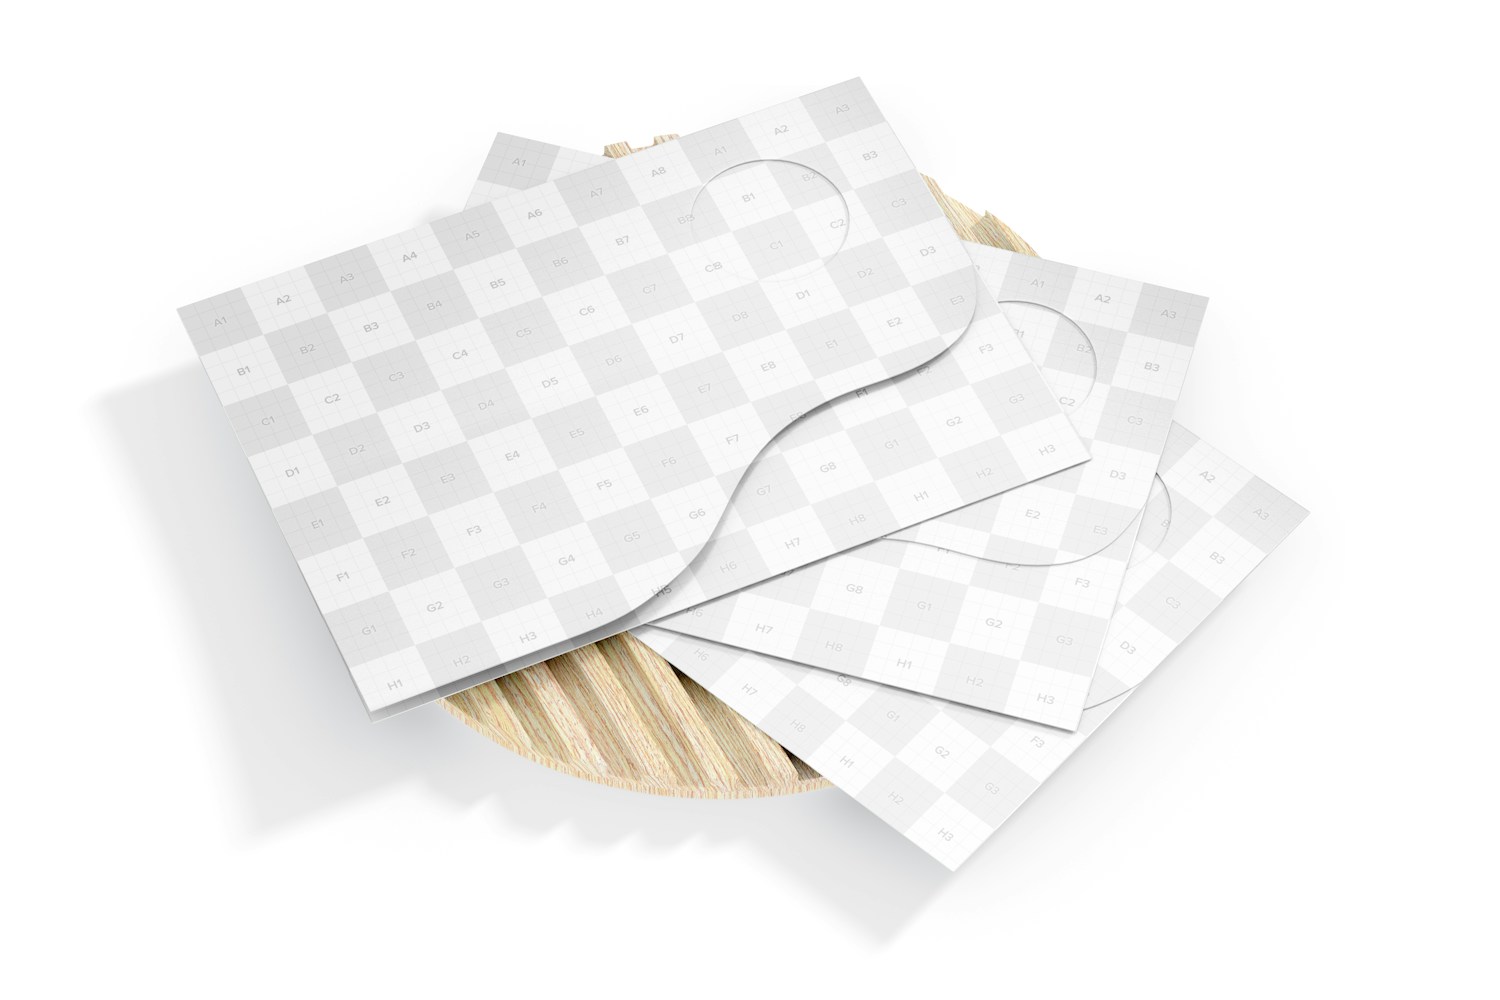 Rectangular Corporate Business Card Mockup, Stacked